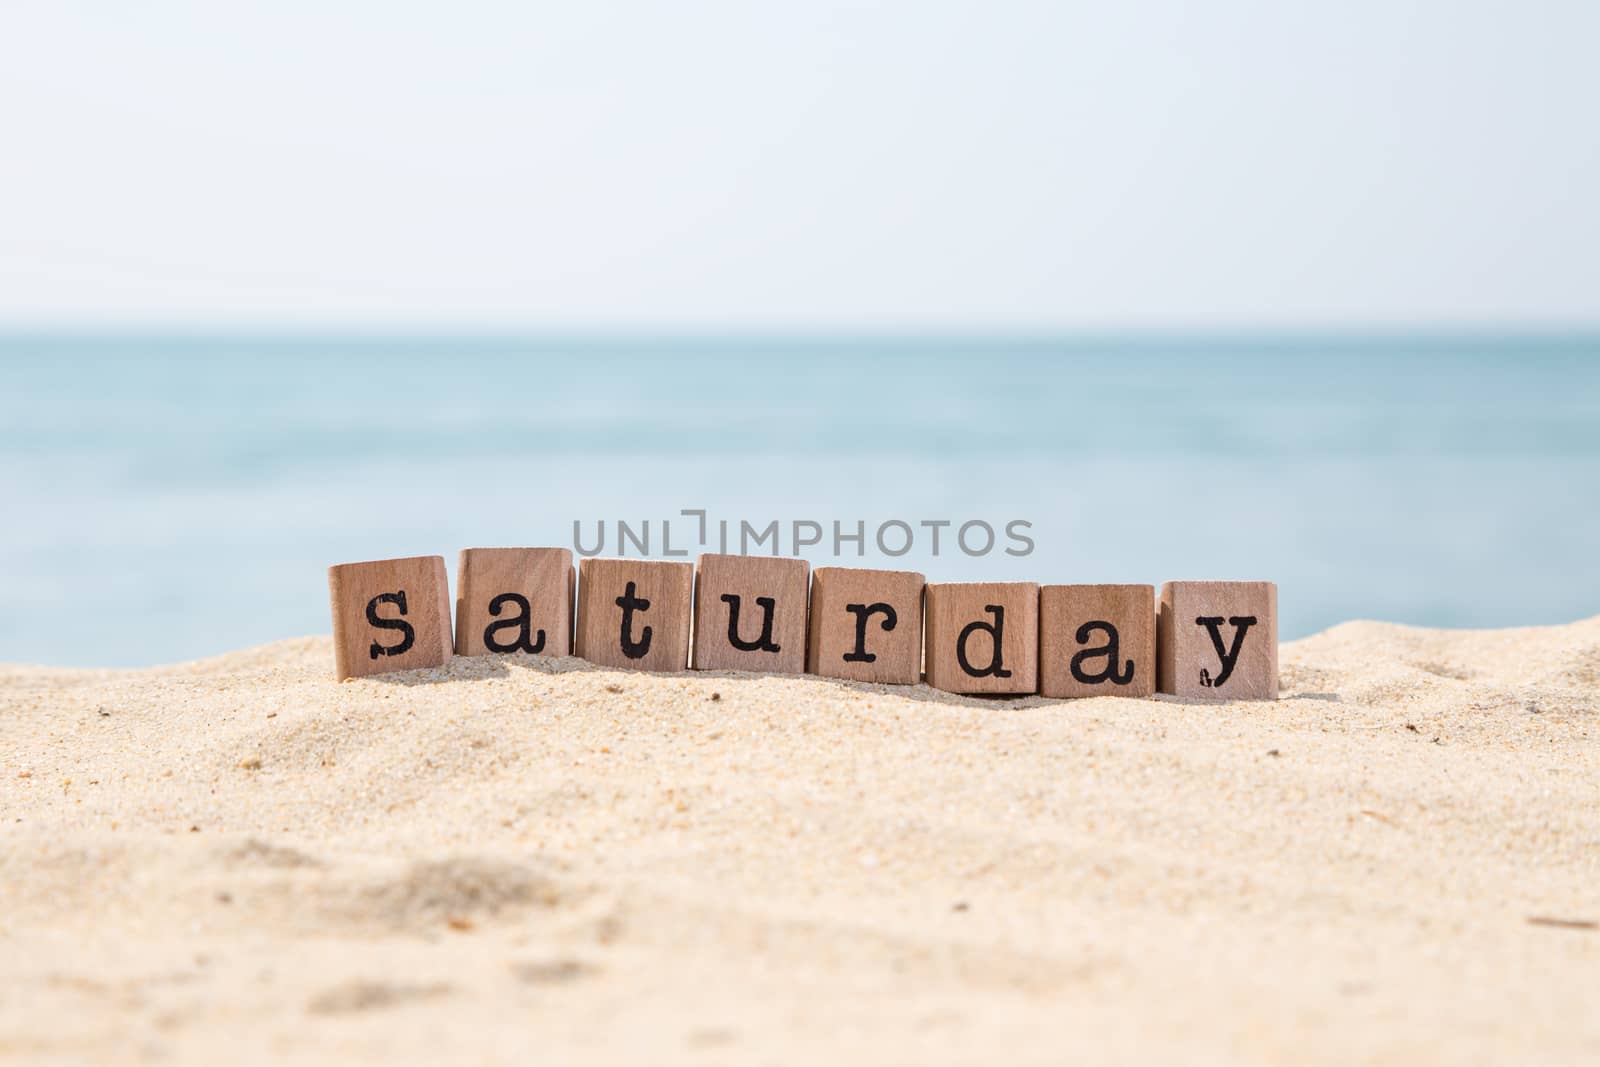 Saturday word on wood rubber stamps stack on seaside with beautiful blue sea view on background, day and time concepts